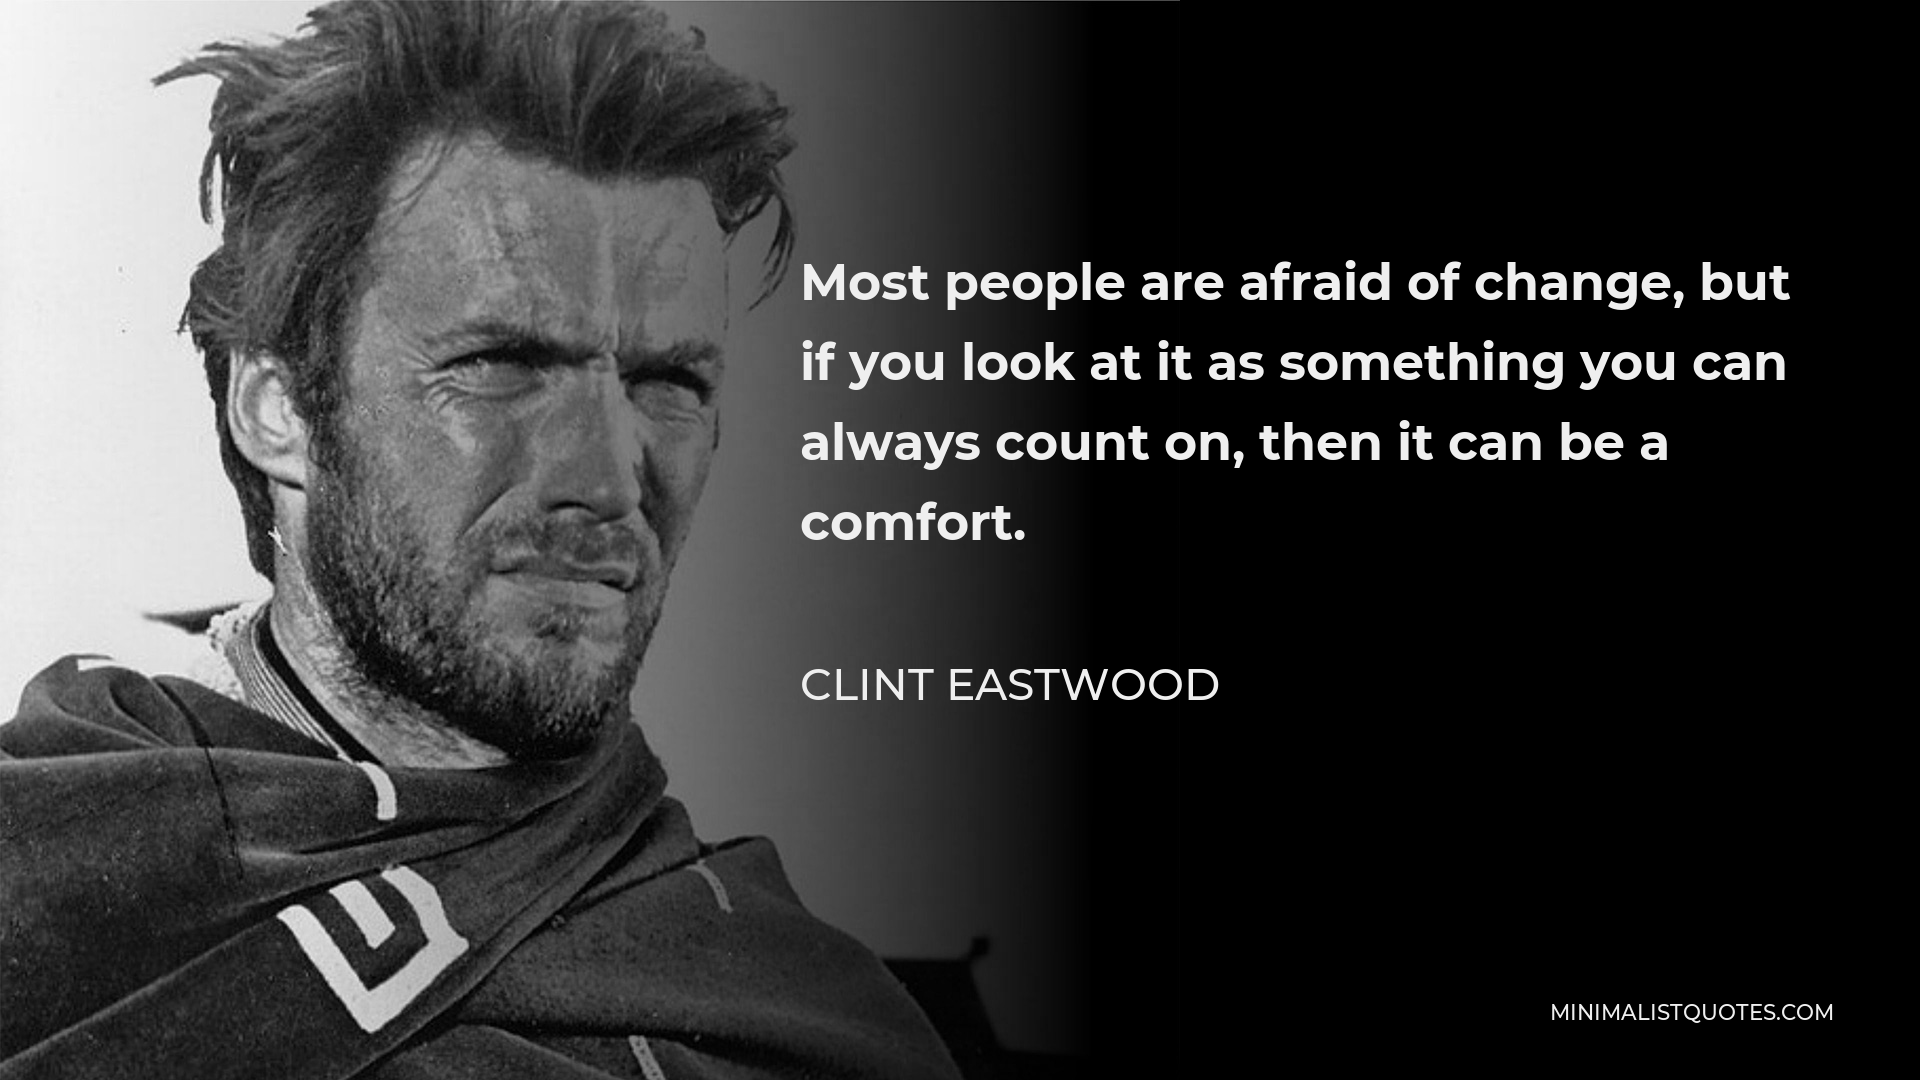 Clint Eastwood Quote - Most people are afraid of change, but if you look at it as something you can always count on, then it can be a comfort.